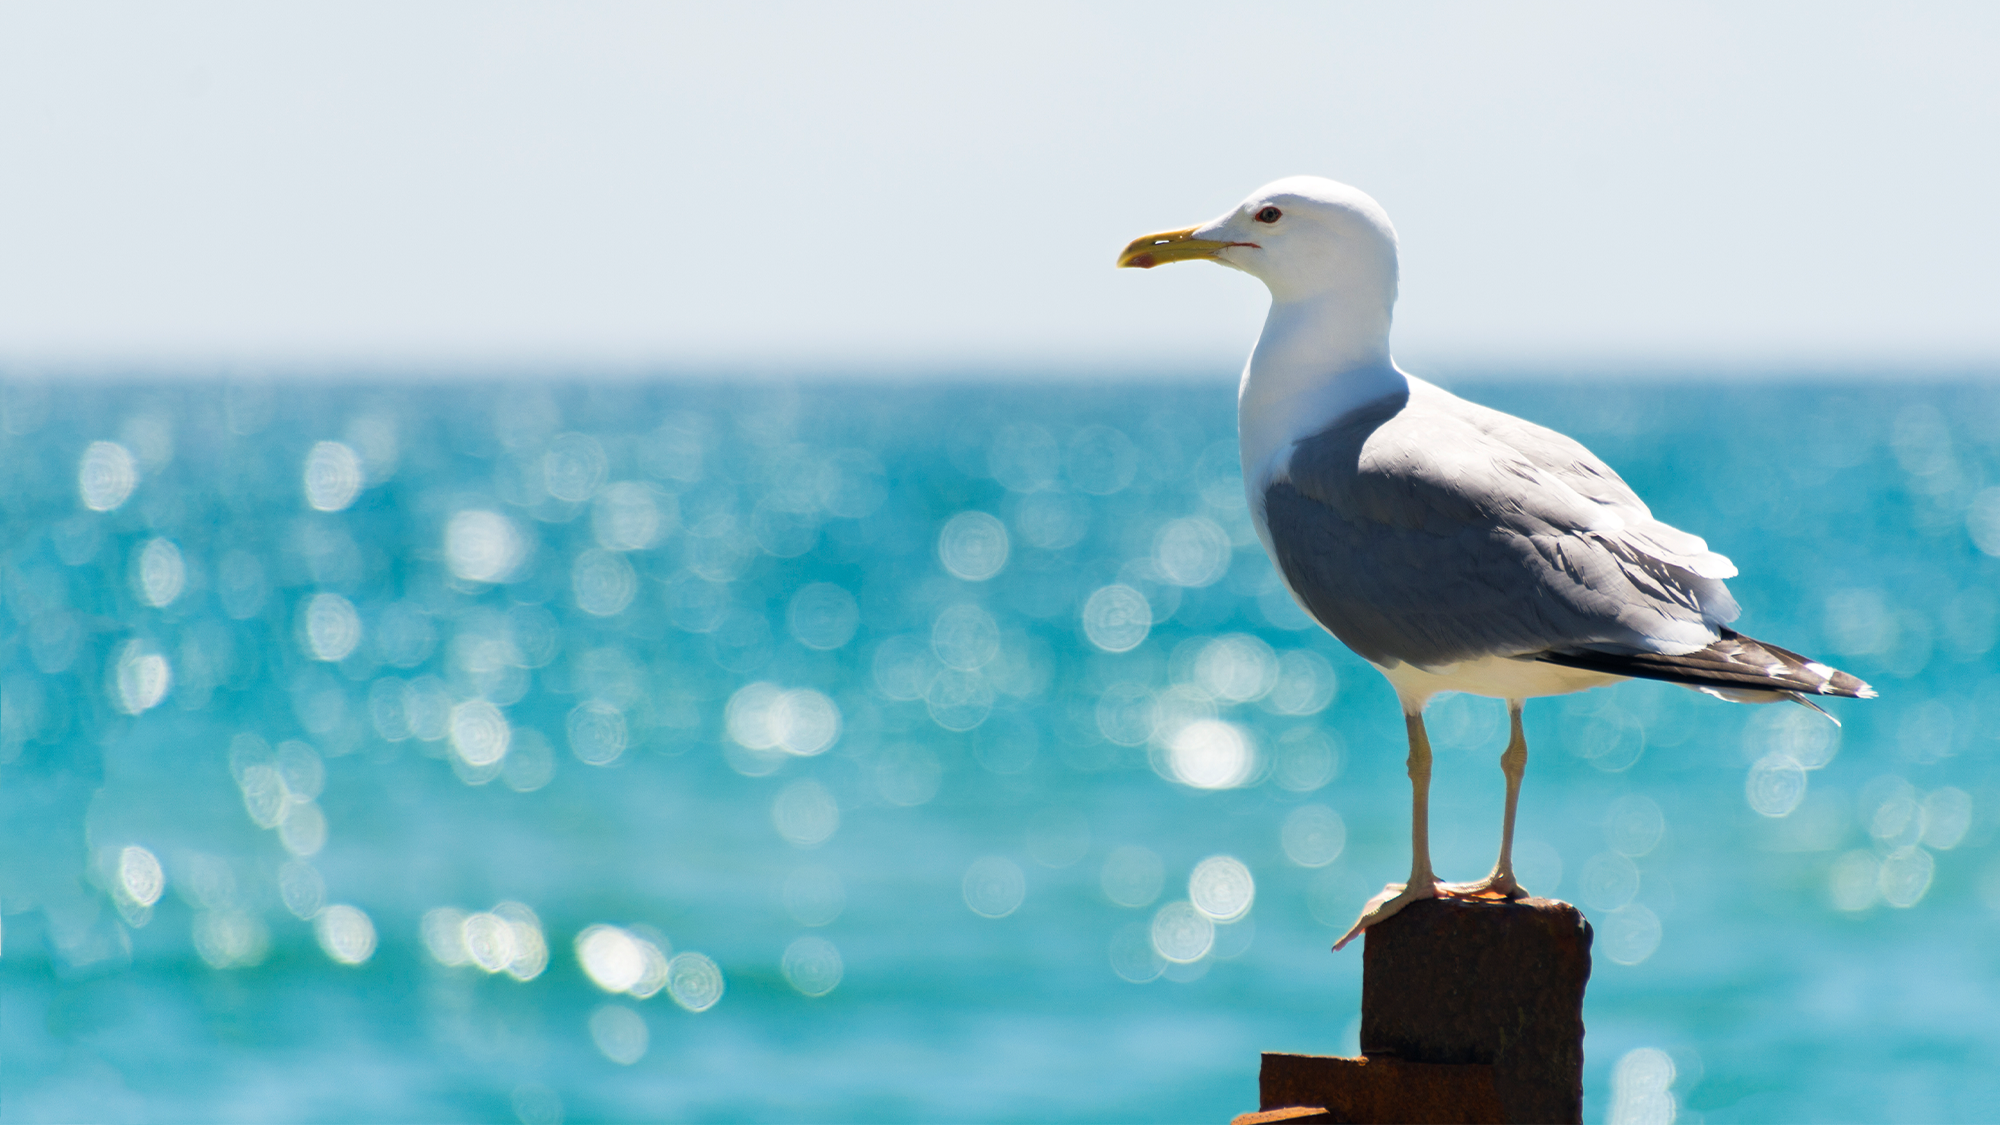 Gull species with larger brains thrive in urban spaces